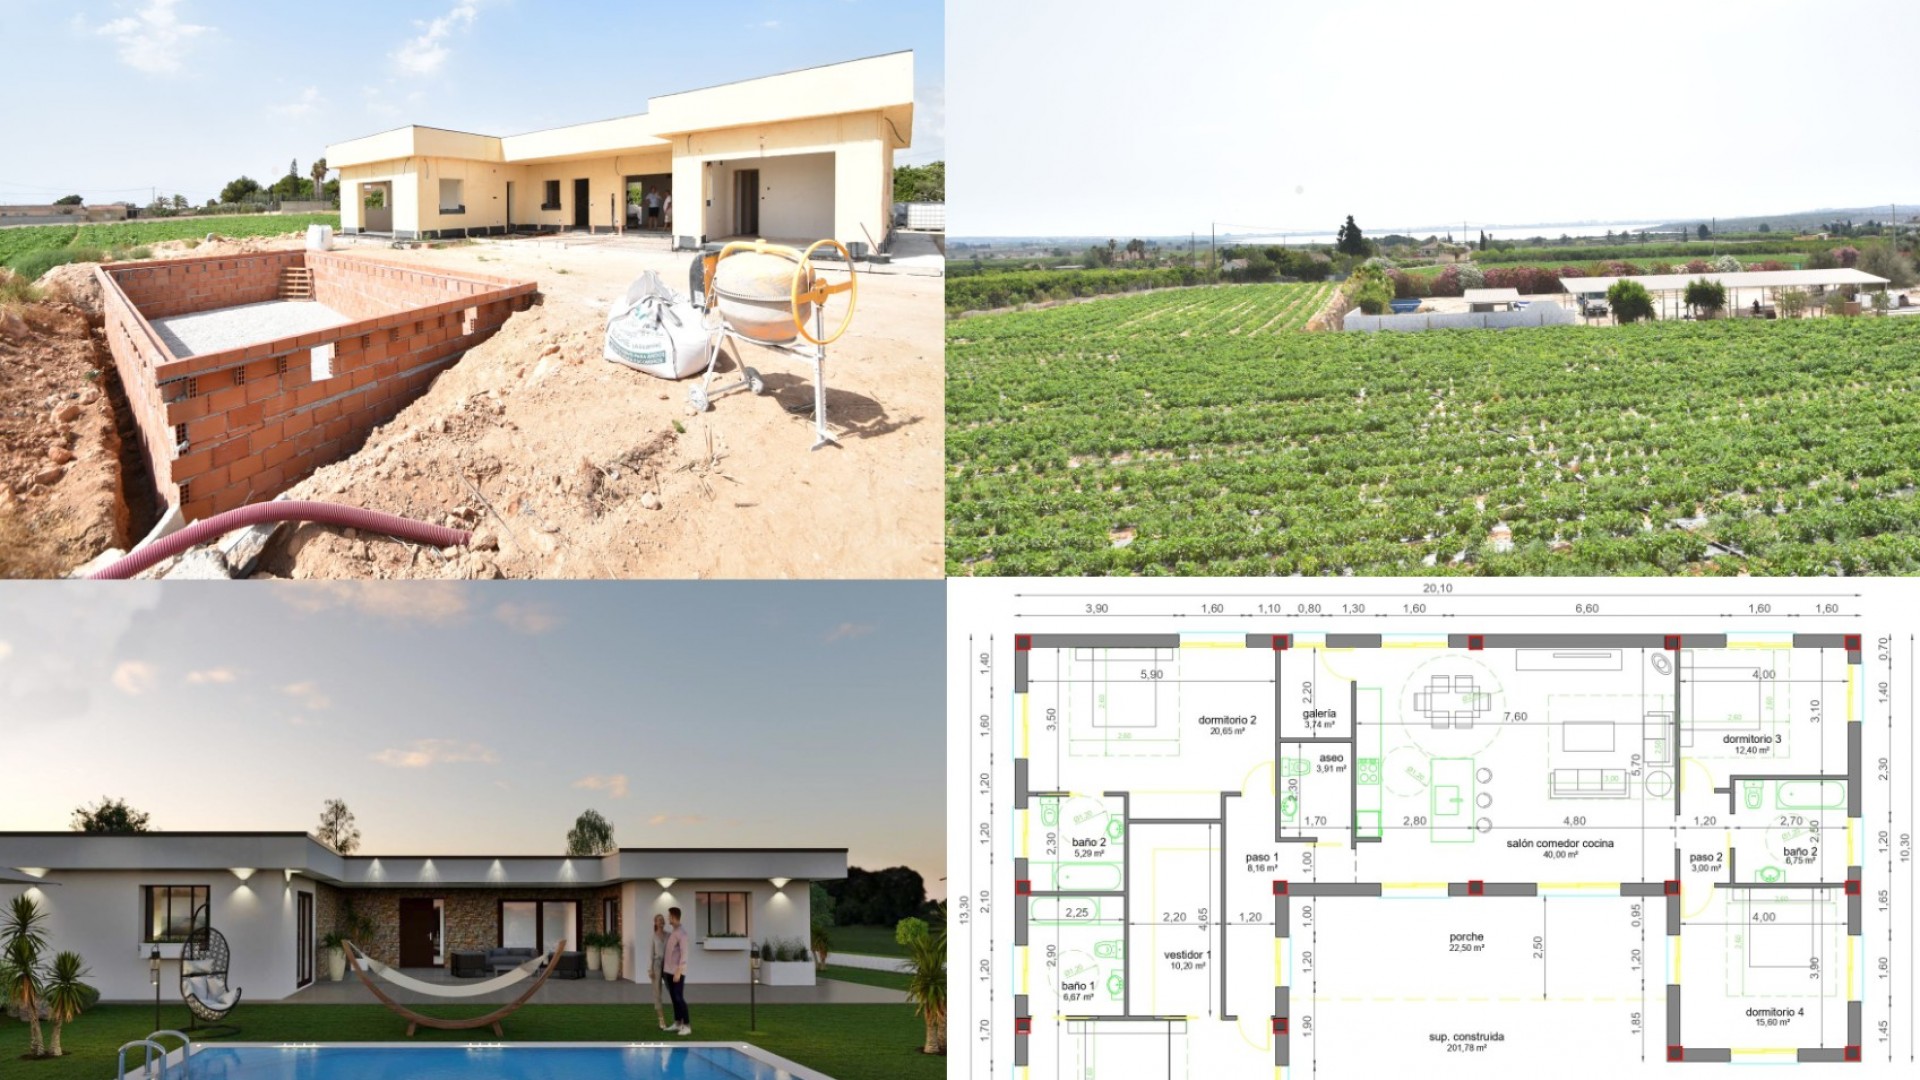 House/villa partly built in Los Montesinos, 4 bedrooms, 3 bathrooms and guest toilet, garage of 24m2. The houses are built to order so adaptations are the norm.